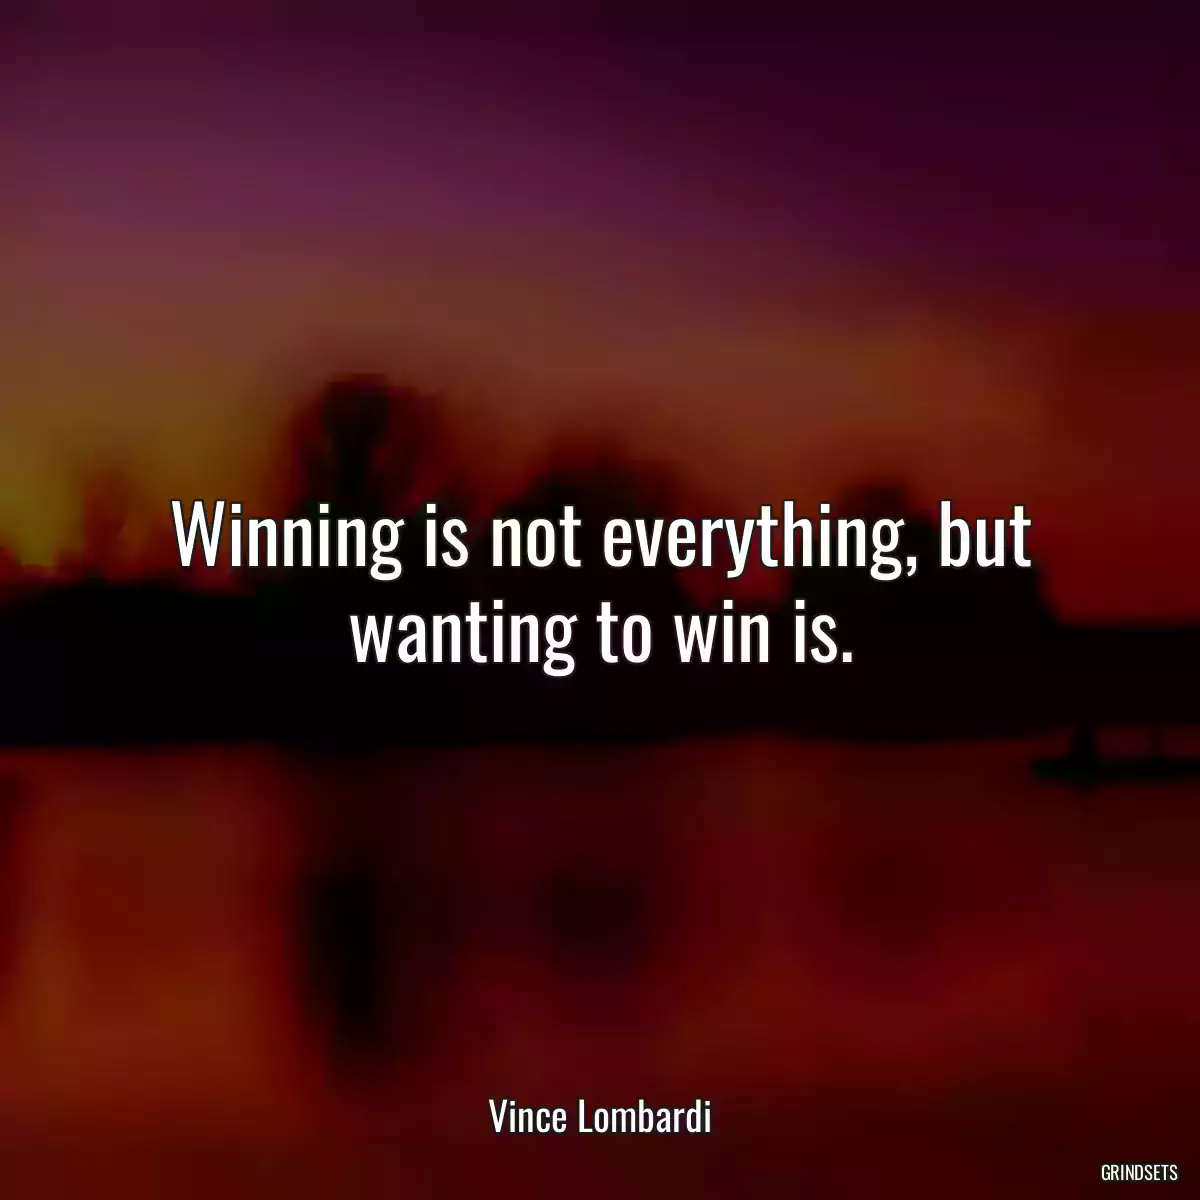 Winning is not everything, but wanting to win is.